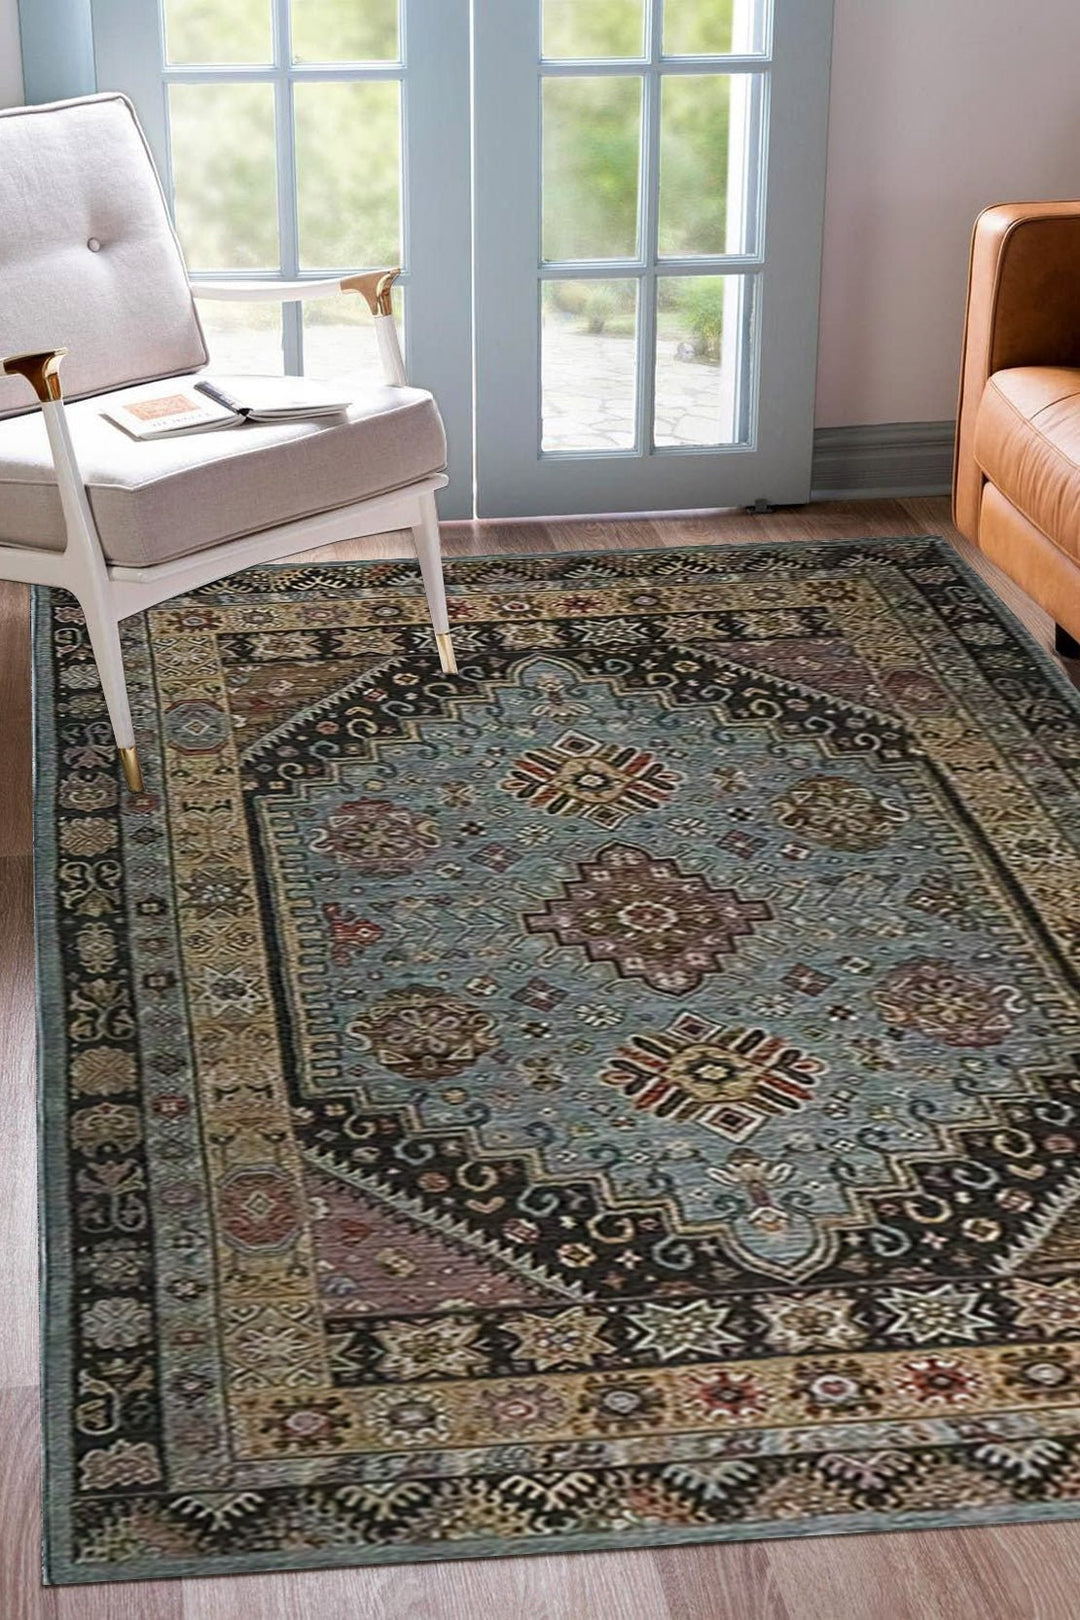 Premium Quality Turkish Antia Rug - 6.56 x 9.84 FT - Blue - Resilient Construction for Long-Lasting Use - V Surfaces